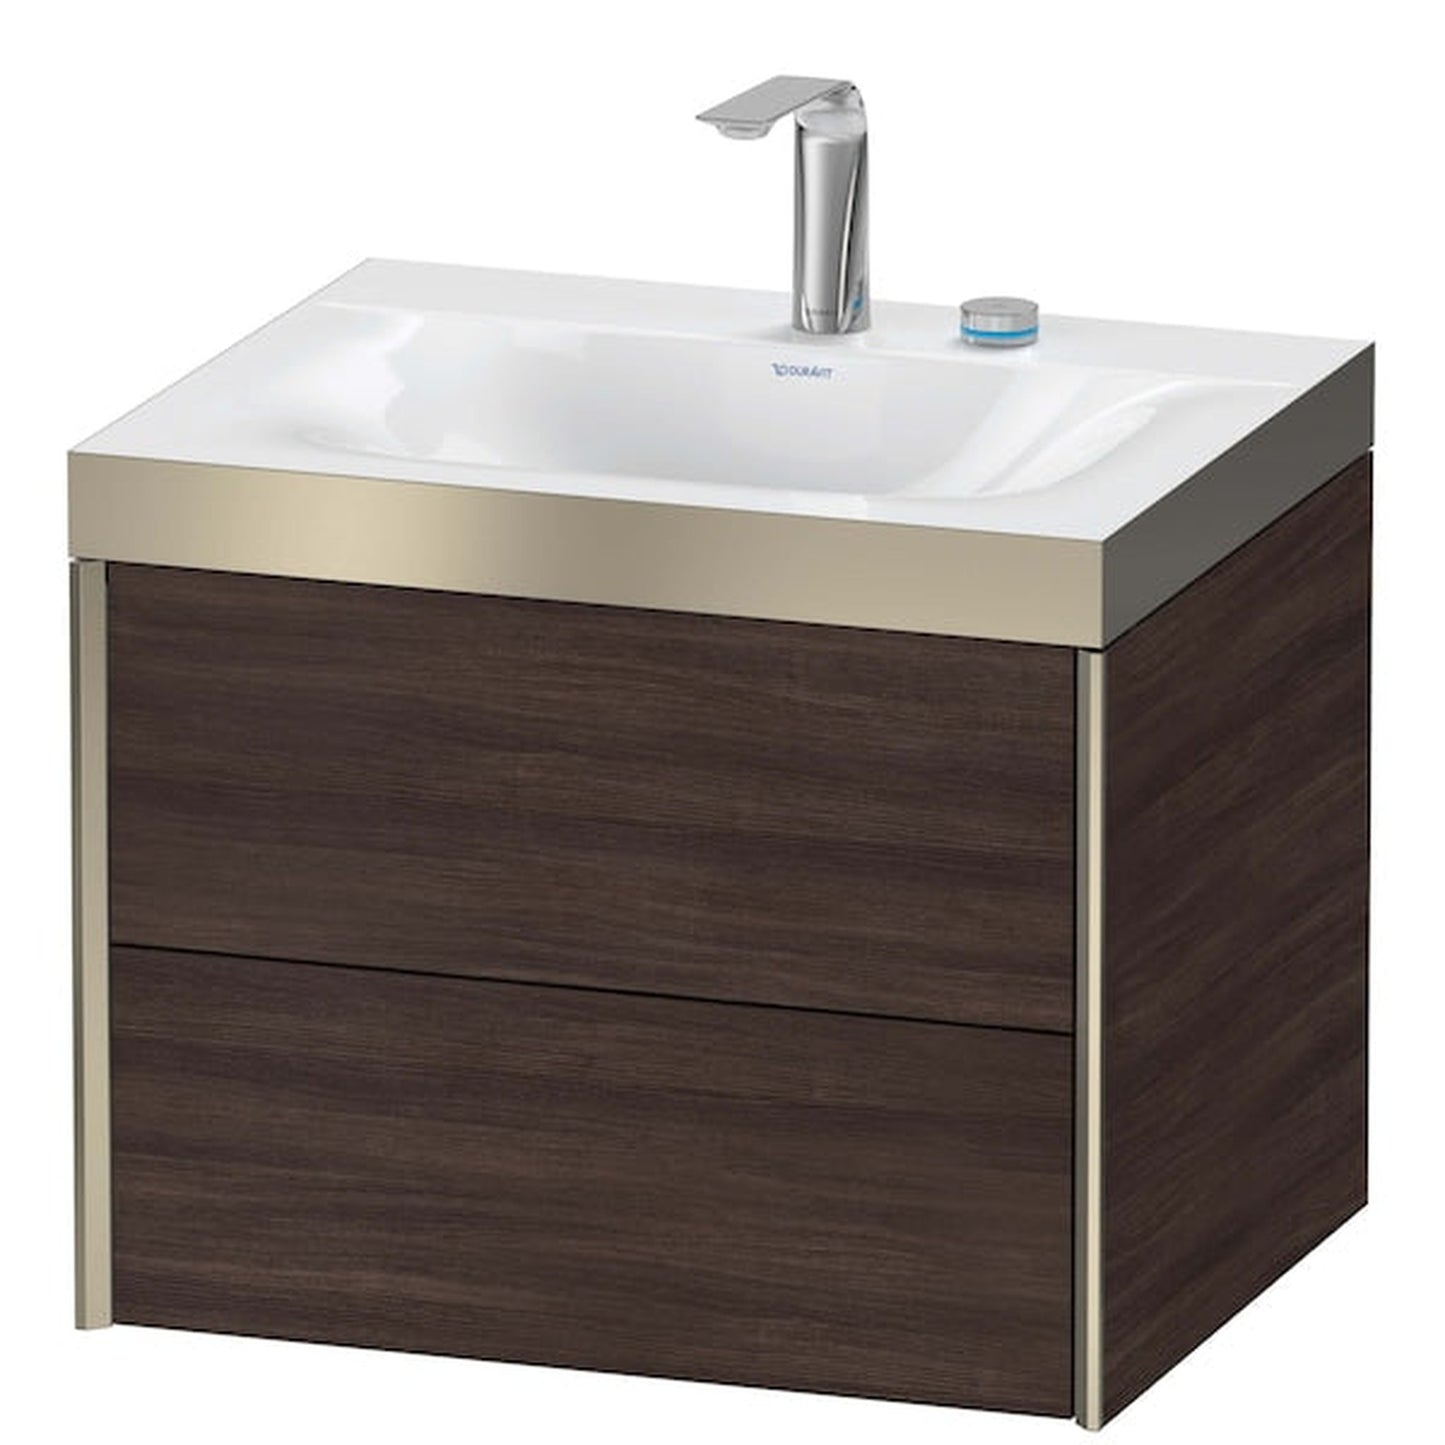 Duravit Xviu 24" x 20" x 19" Two Drawer C-Bonded Wall-Mount Vanity Kit With Two Tap Holes, Chestnut Dark (XV4614EB153P)